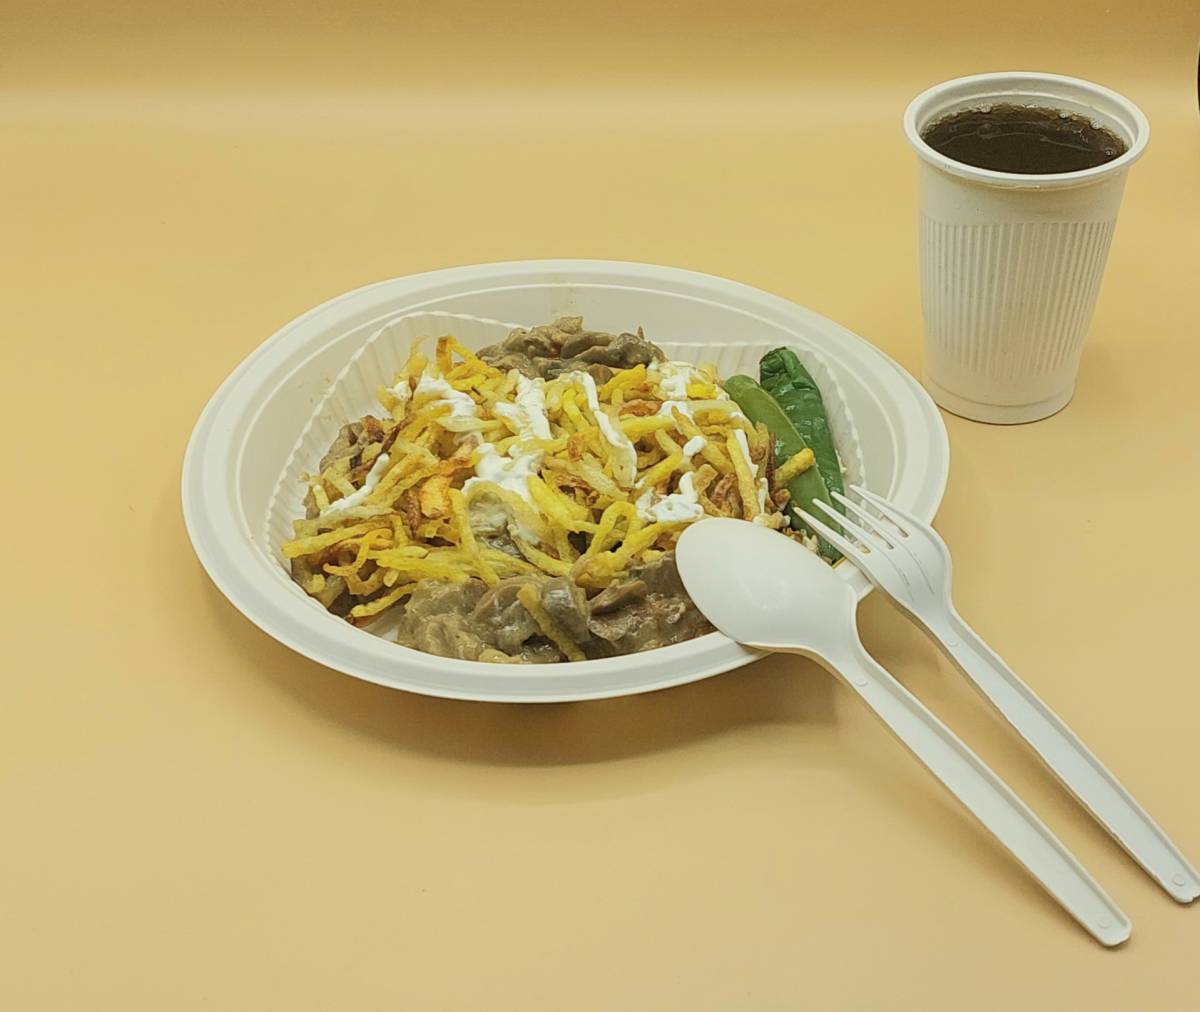 Biodegradable plate and cup